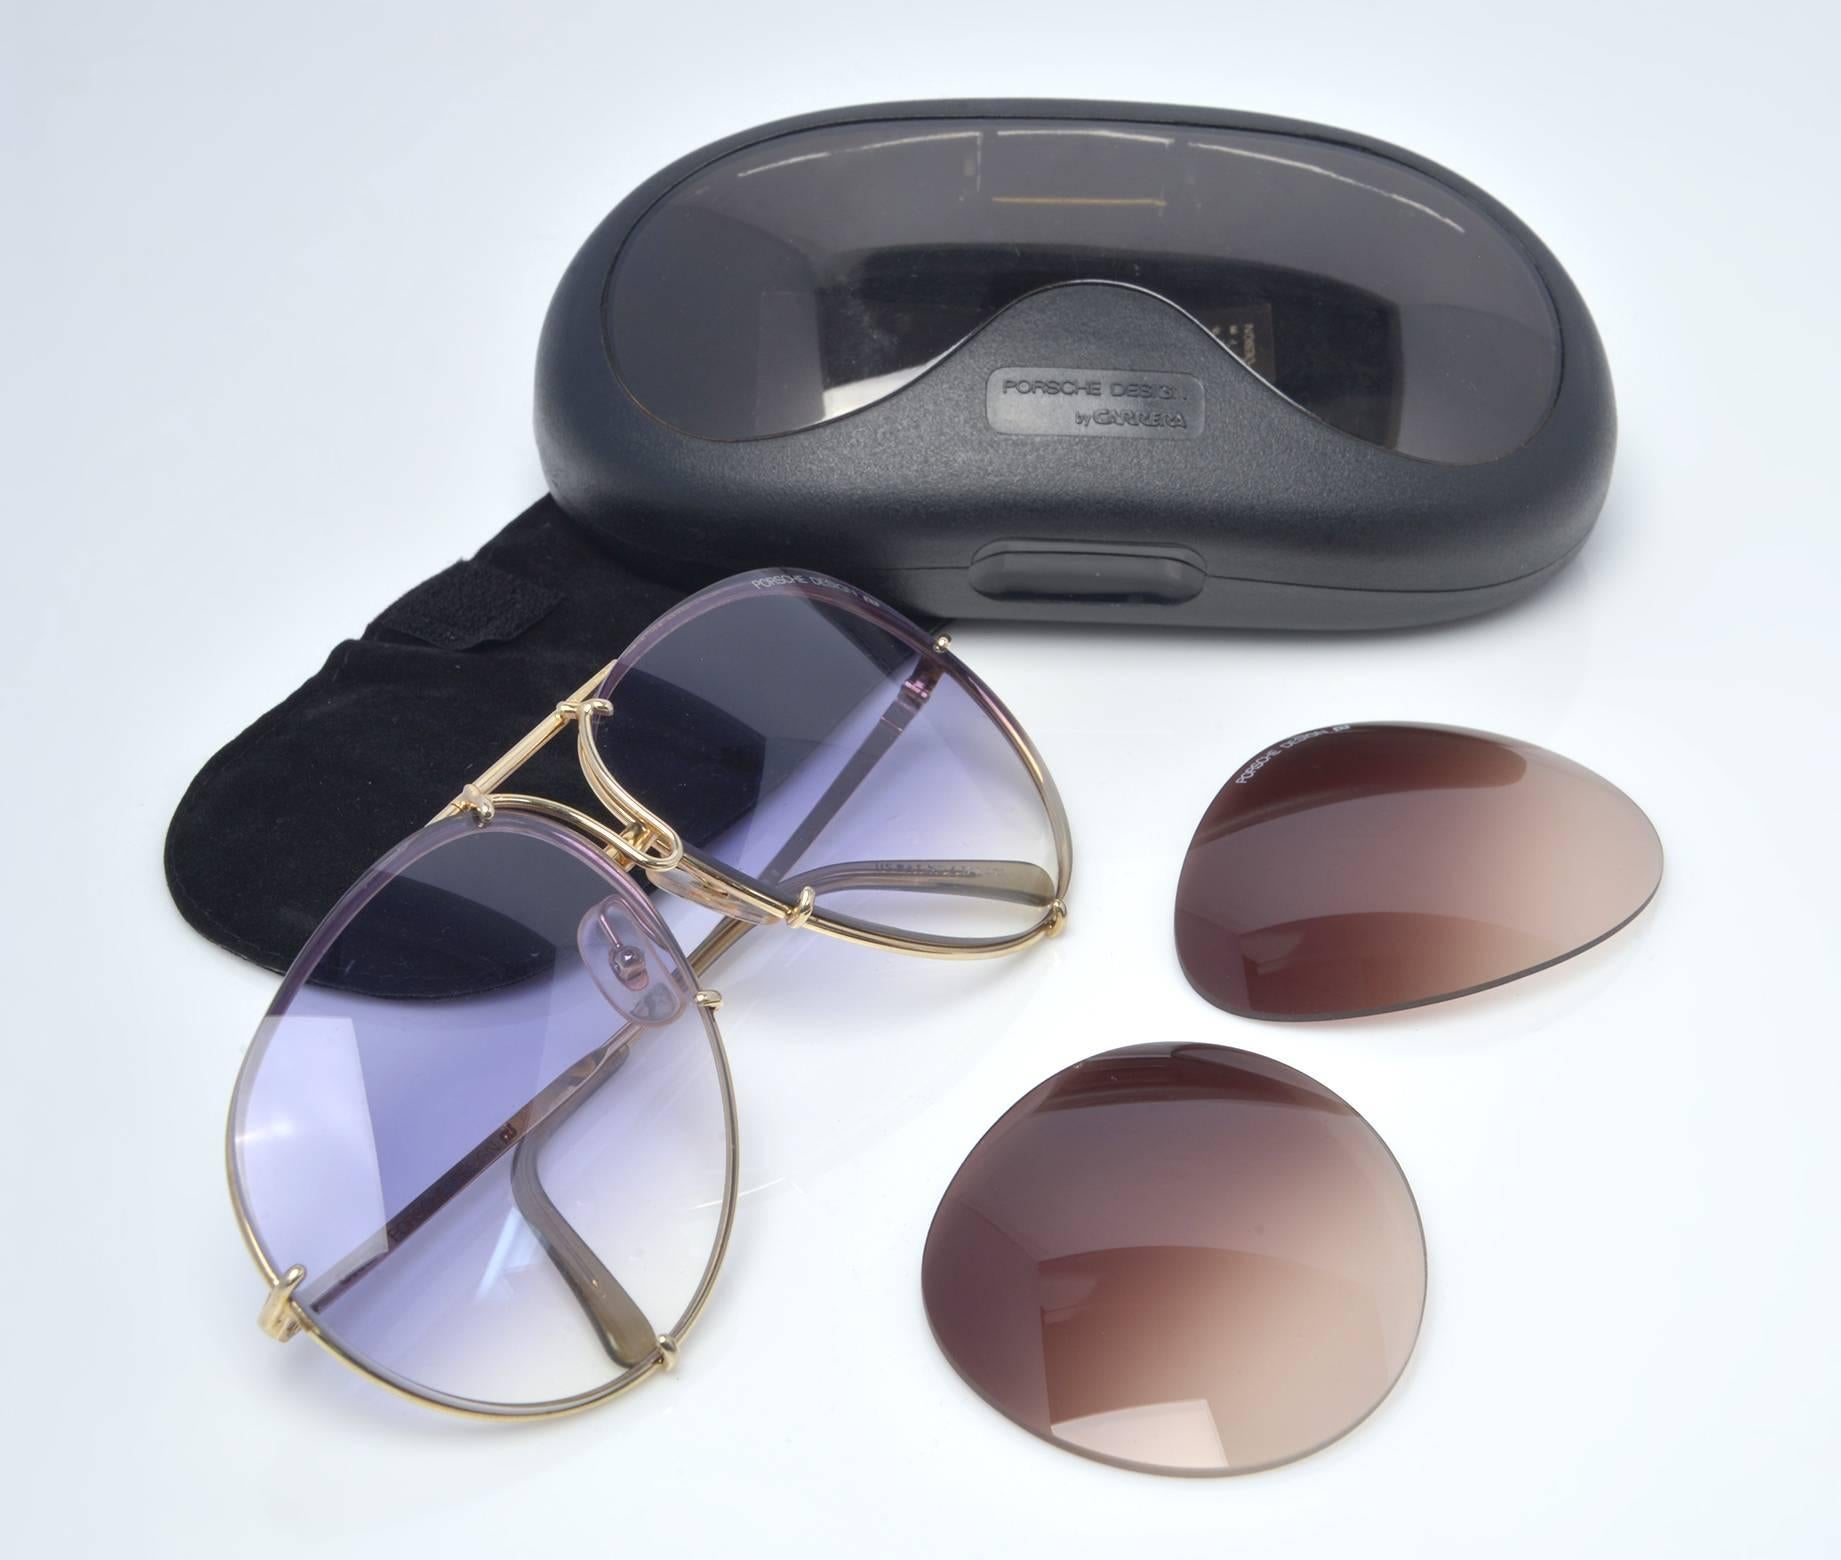 These classic 5621 Porsche design by Carrera sunglasses combine gold and silver titanium frames with a very rare blue gradient lens and come with a second set of brown gradient lenses which are quite rare as well.

1980's Porsche sunglasses were